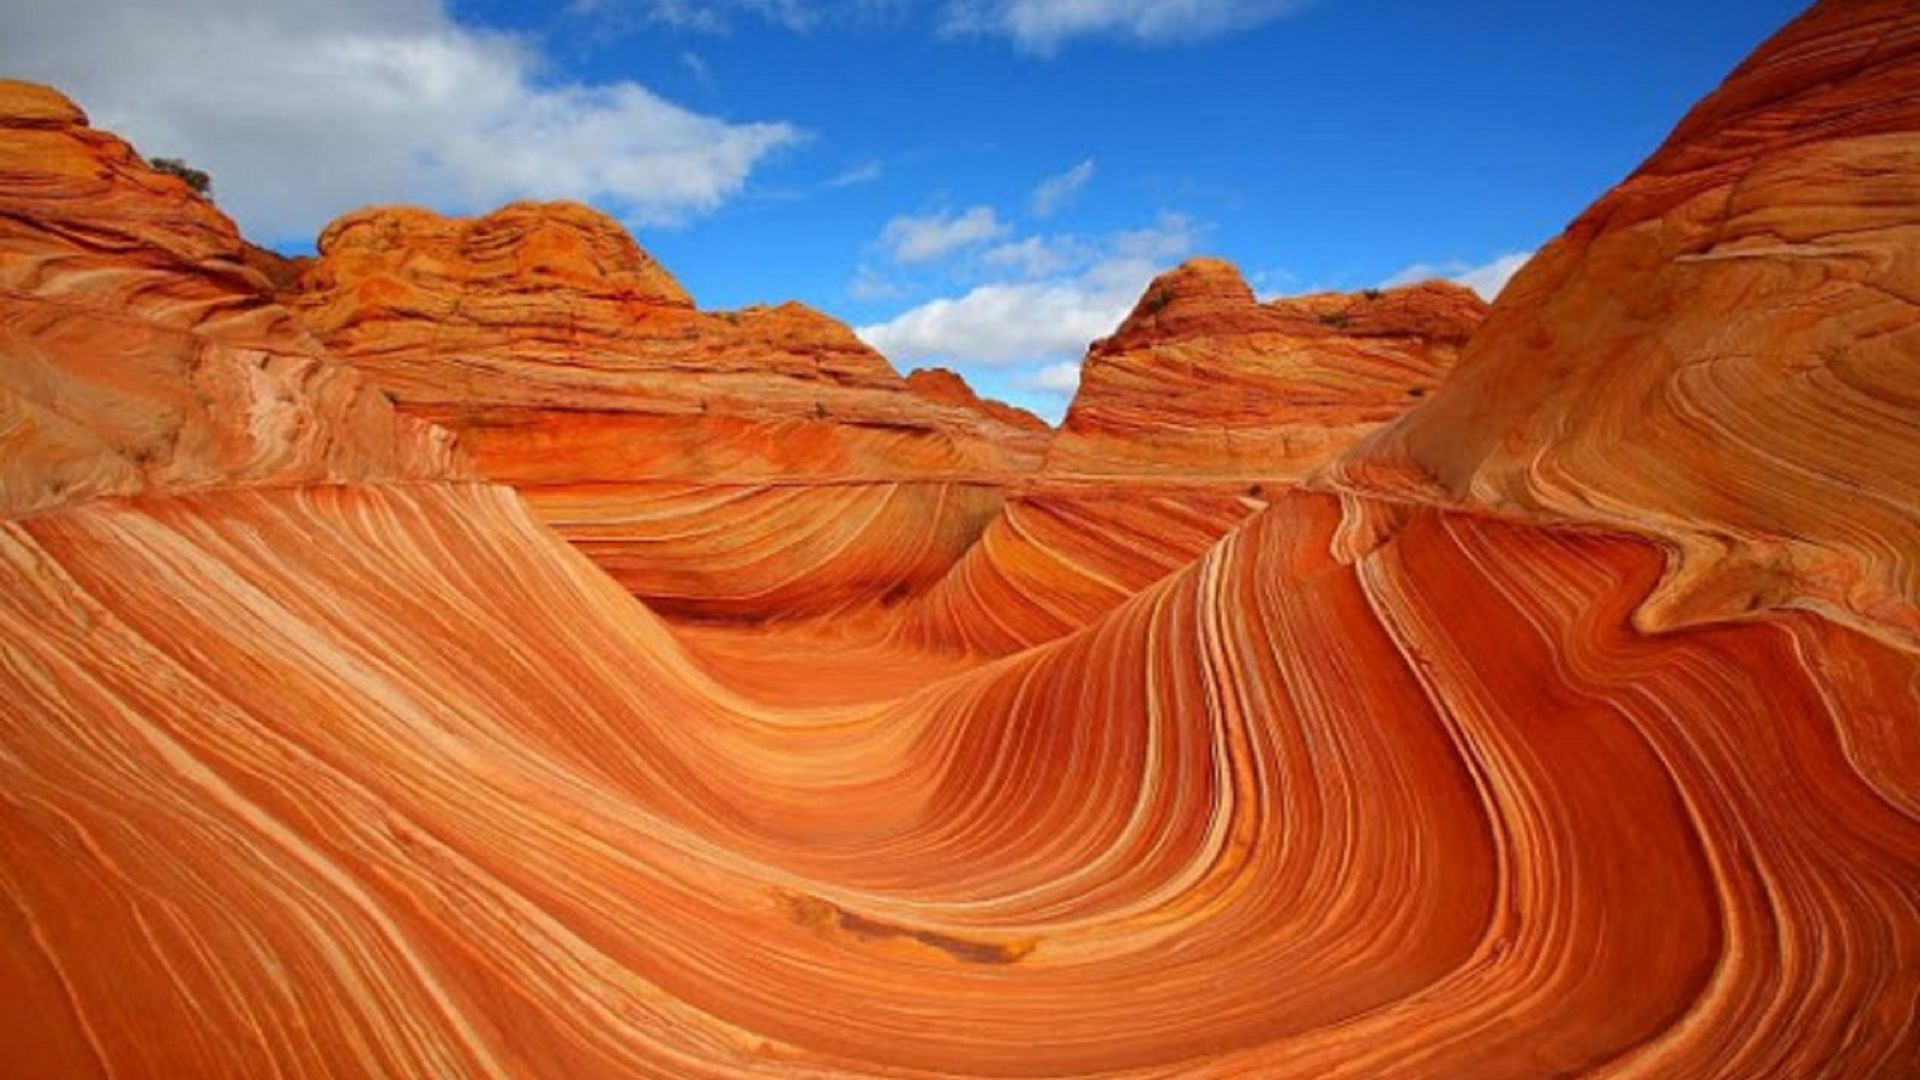 Wallpaper The wave, coyote buttes